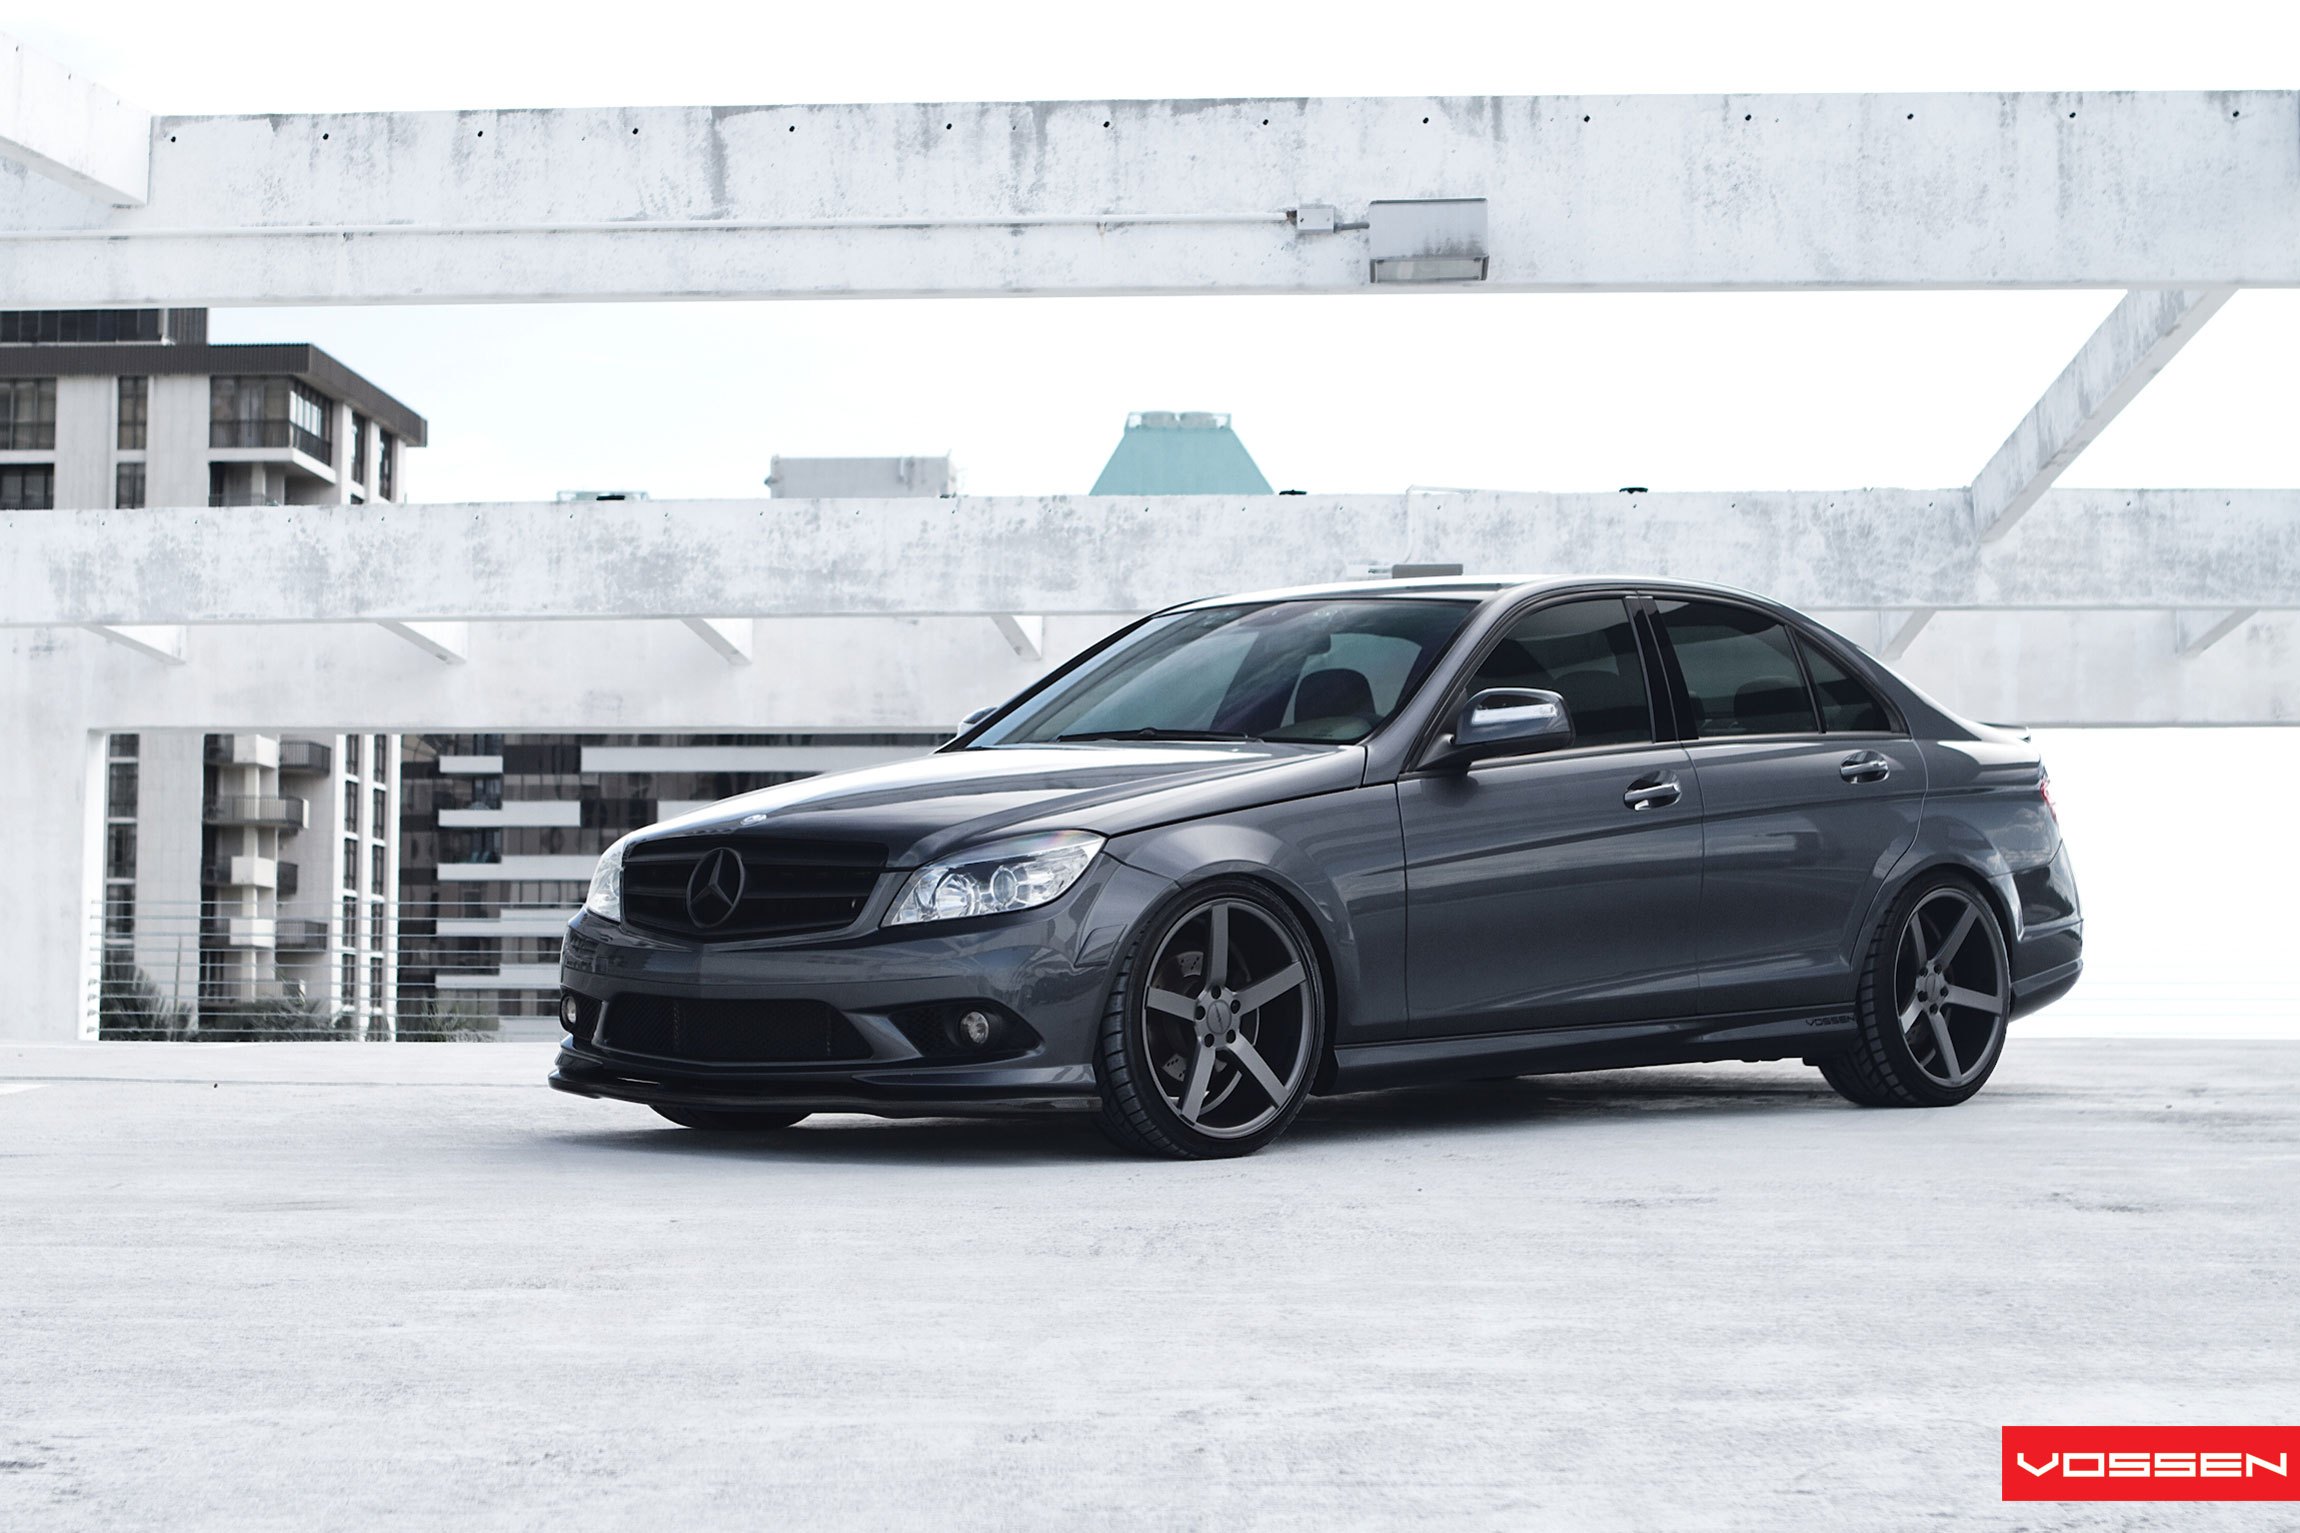 Black Is The New Black Mercedes C Class Amg Fitted With Vossen Rims Carid Com Gallery